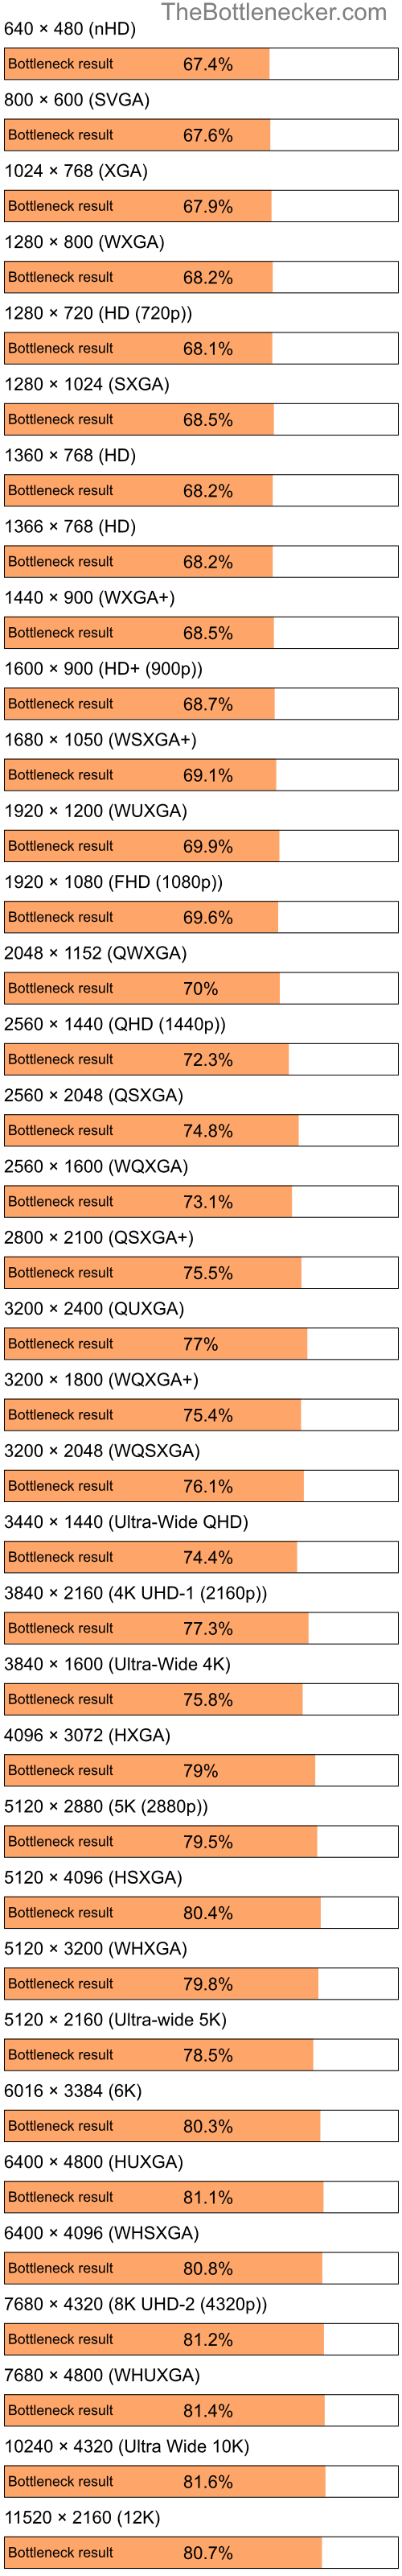 Bottleneck results by resolution for Intel Celeron and AMD Mobility Radeon X1400 in Processor Intense Tasks